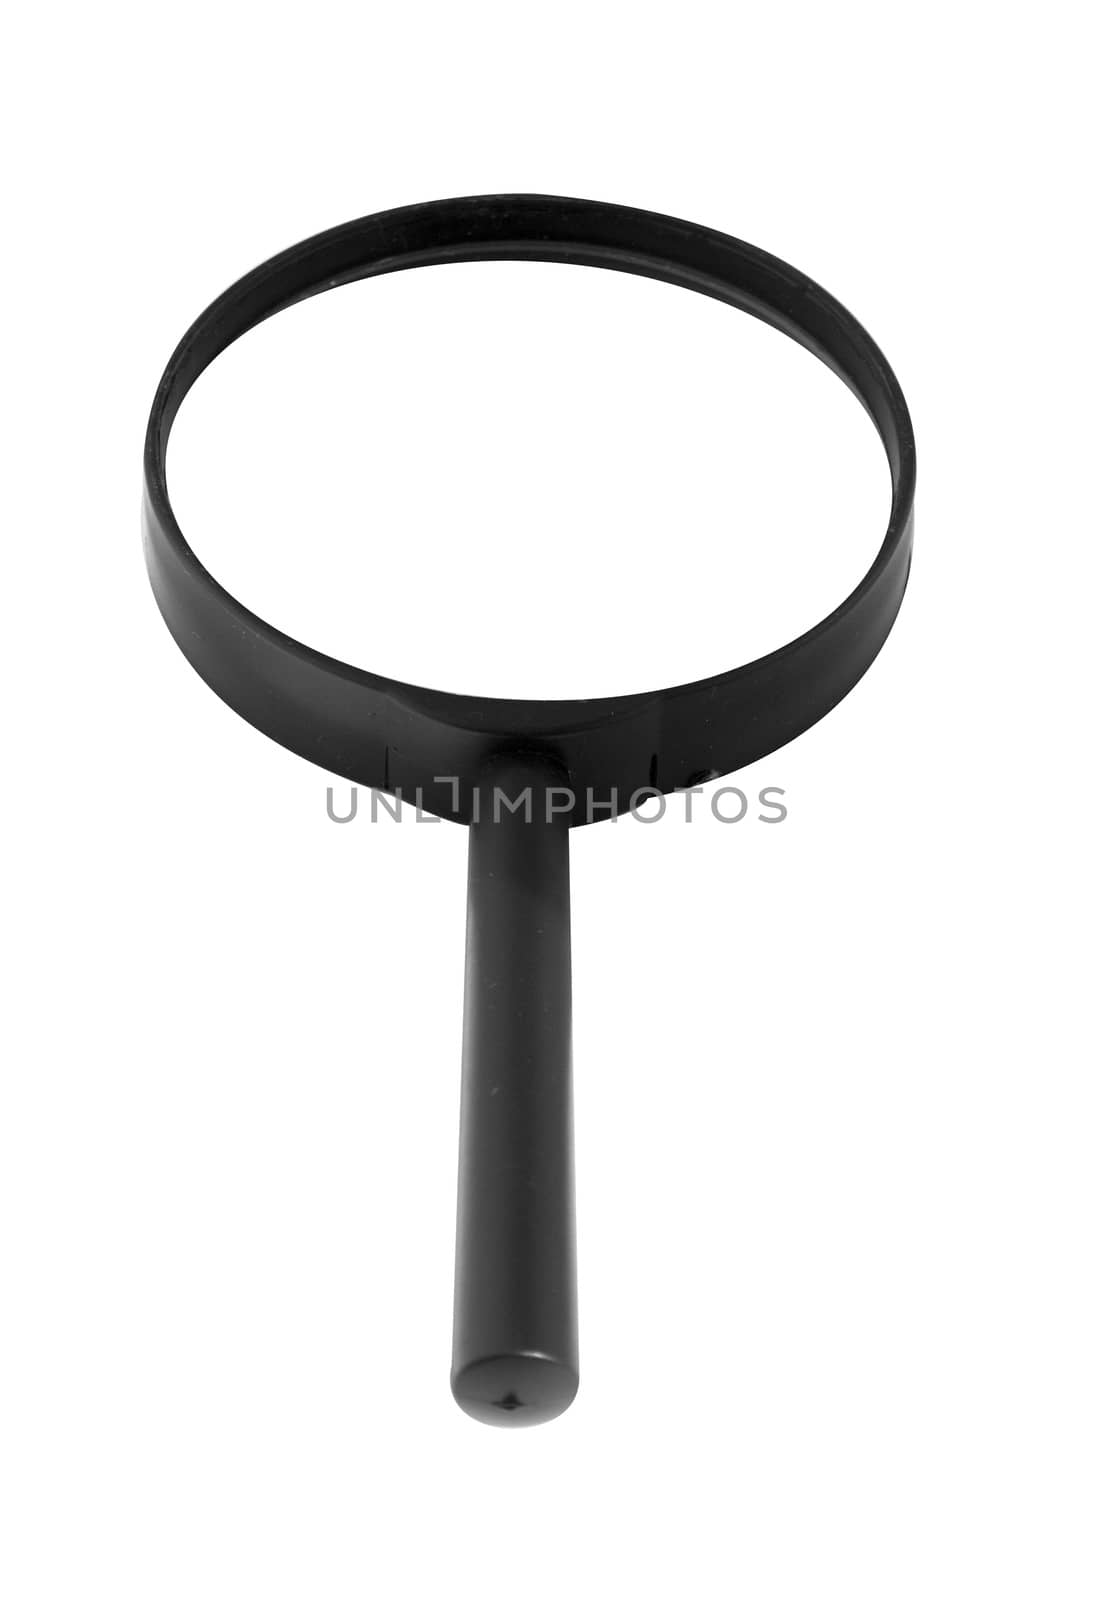 Magnifying Glass, Isolated On White Background